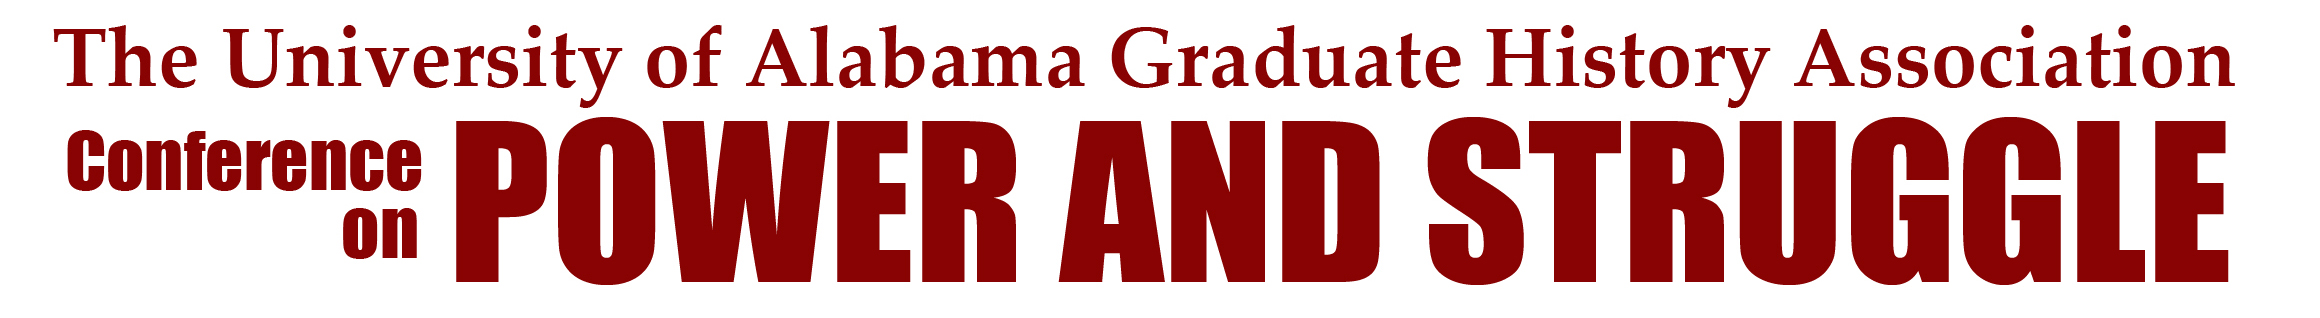 Text graphic that says The University of Alabama Graduate History Association Conference on Power and Struggle